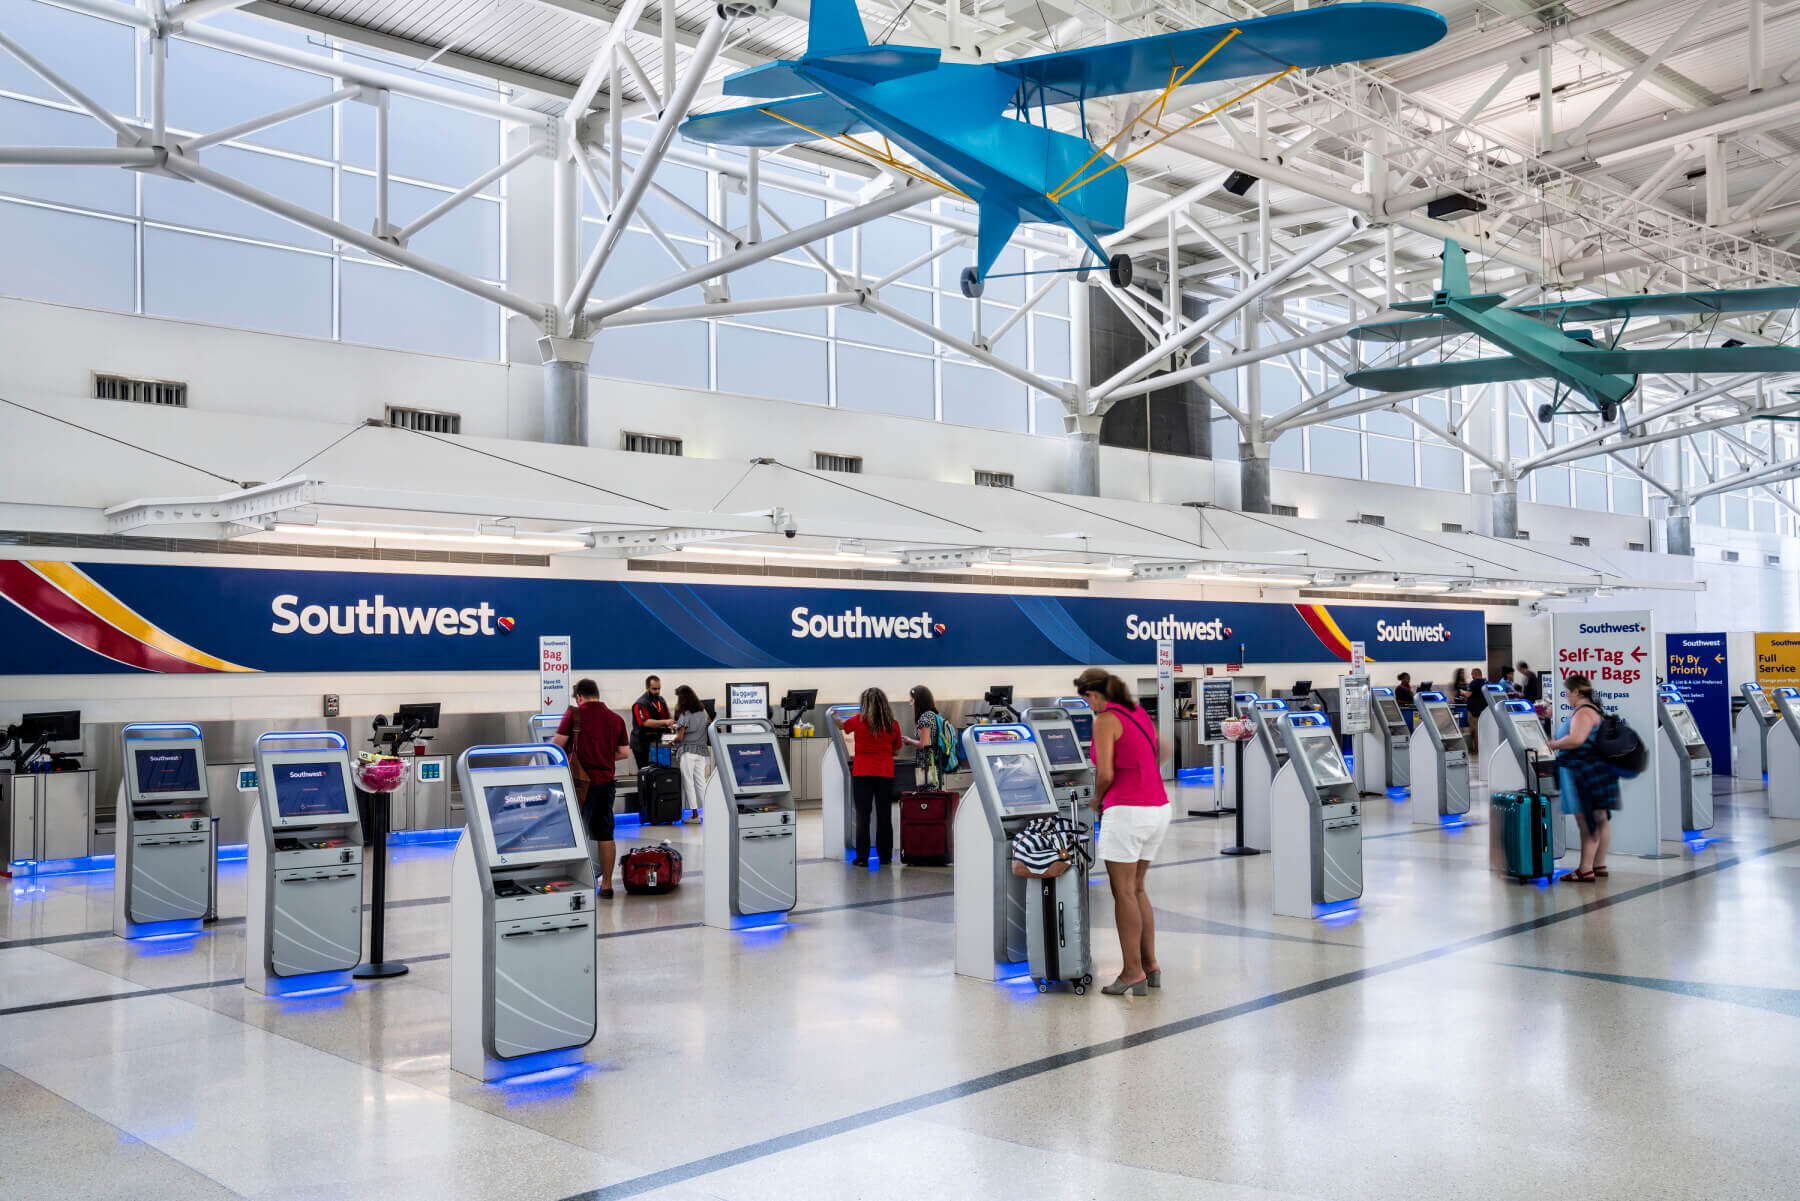 Southwest ticket counter and bag tagging kiosks at Fort Lauderdale-Hollywood International Airport